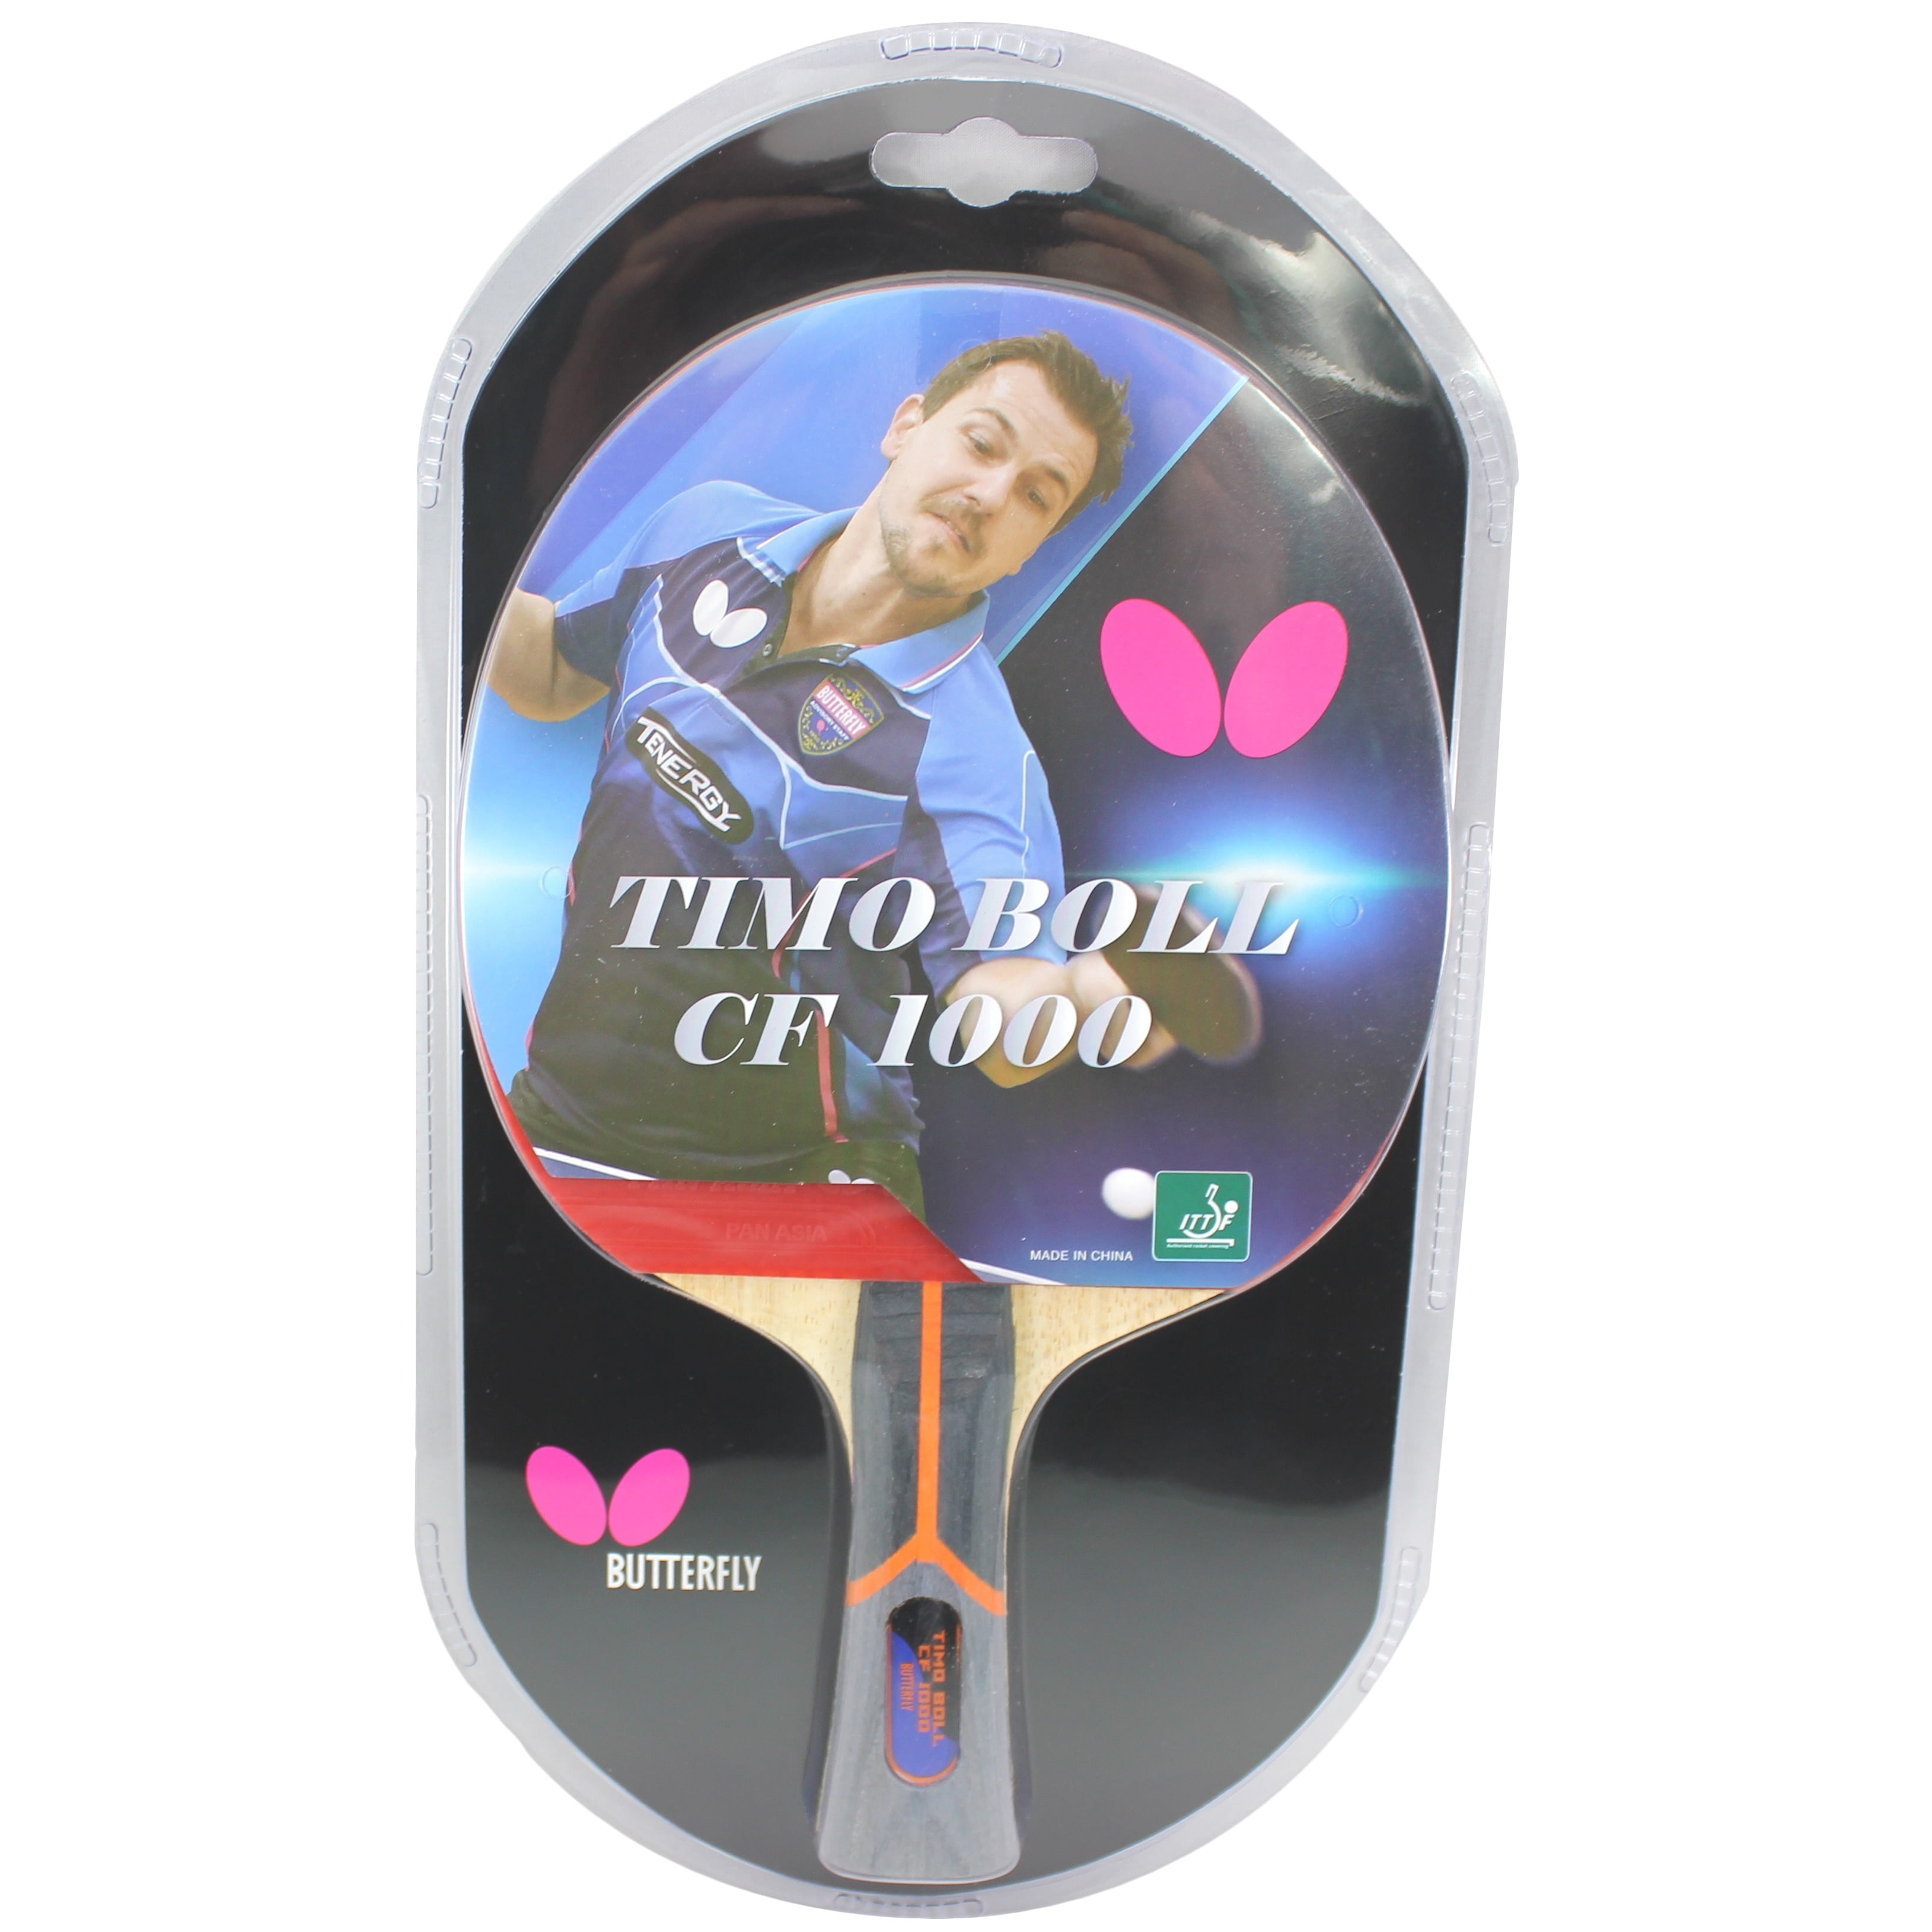 Butterfly Table Tennis Bat with Rubber Timo Boll 1000 